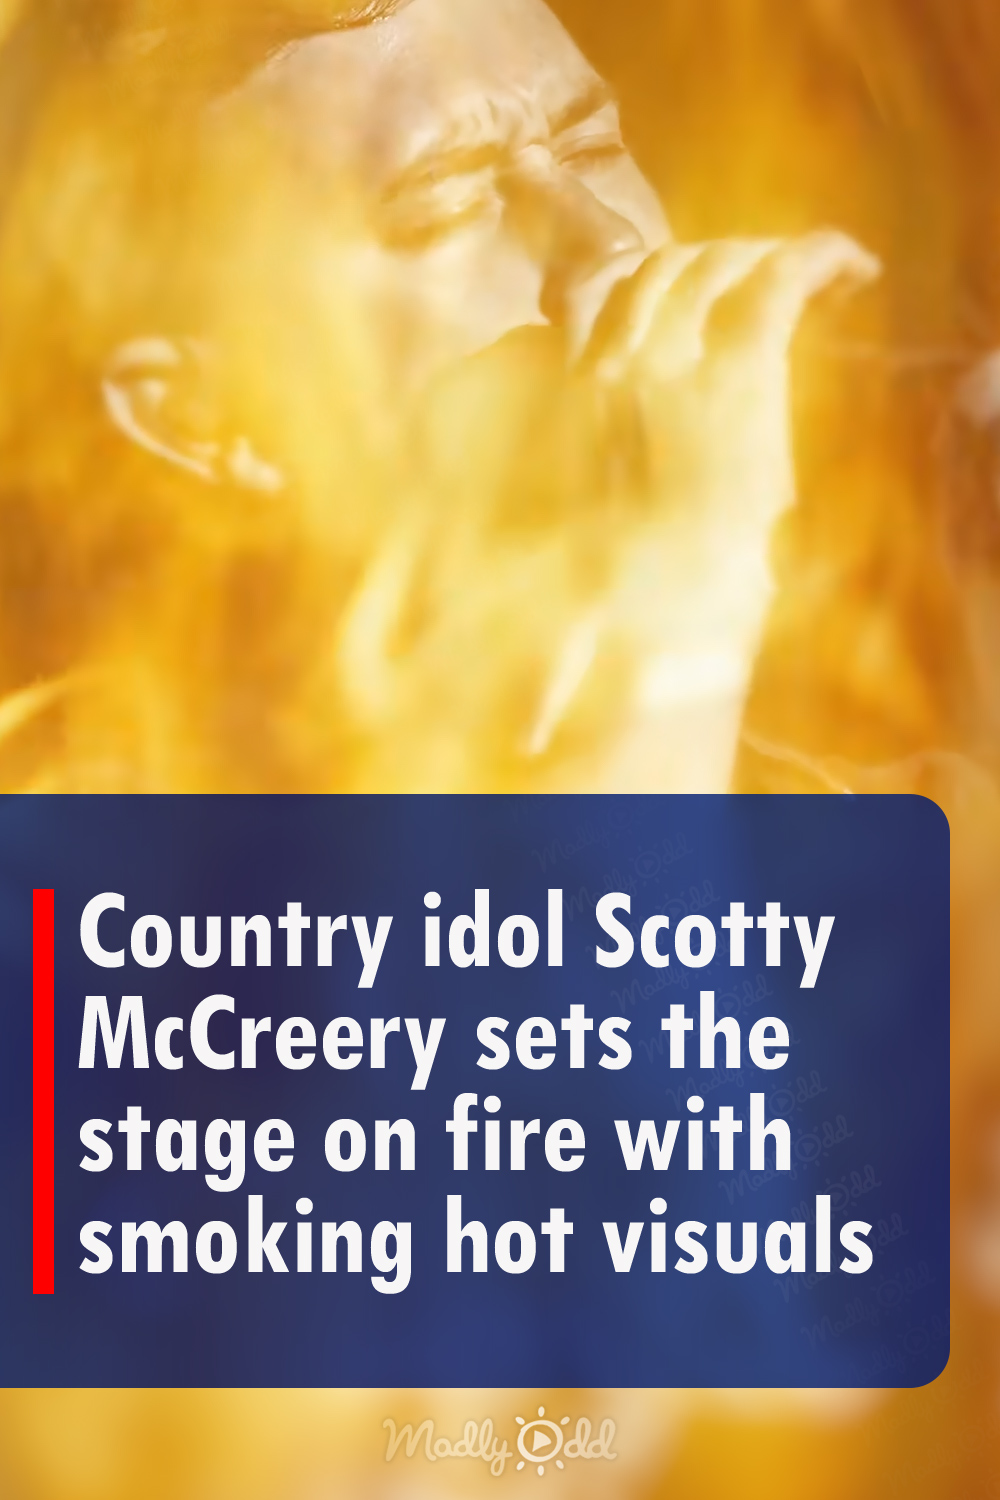 Country idol Scotty McCreery sets the stage on fire with smoking hot visuals